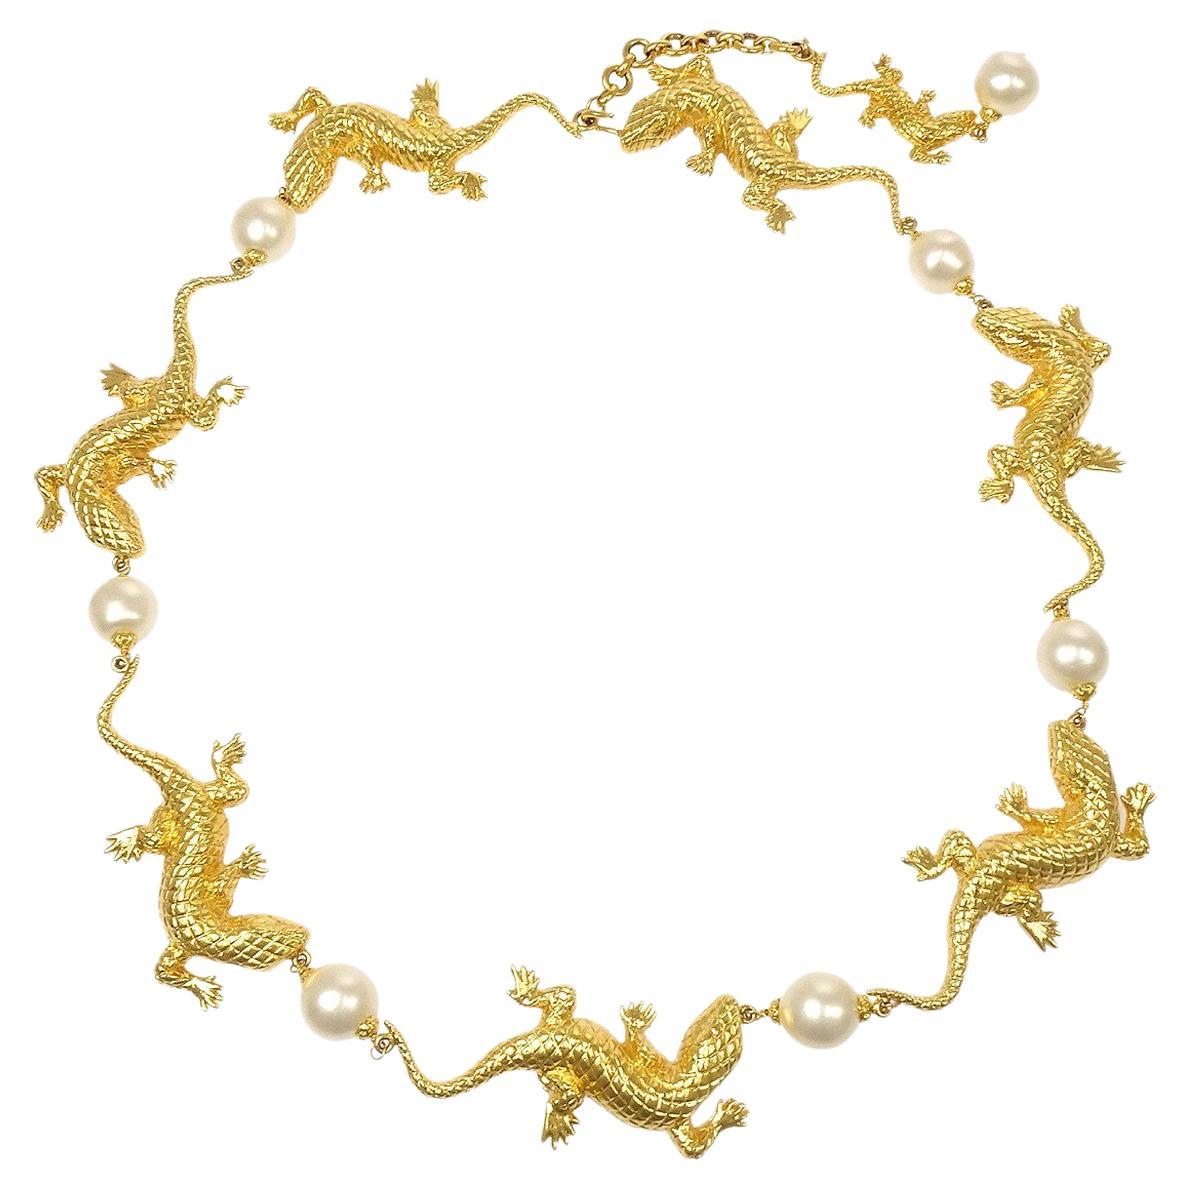 CHANEL Faux Pearl Gold Metal Reptile Charm Chain Link Waist Belt